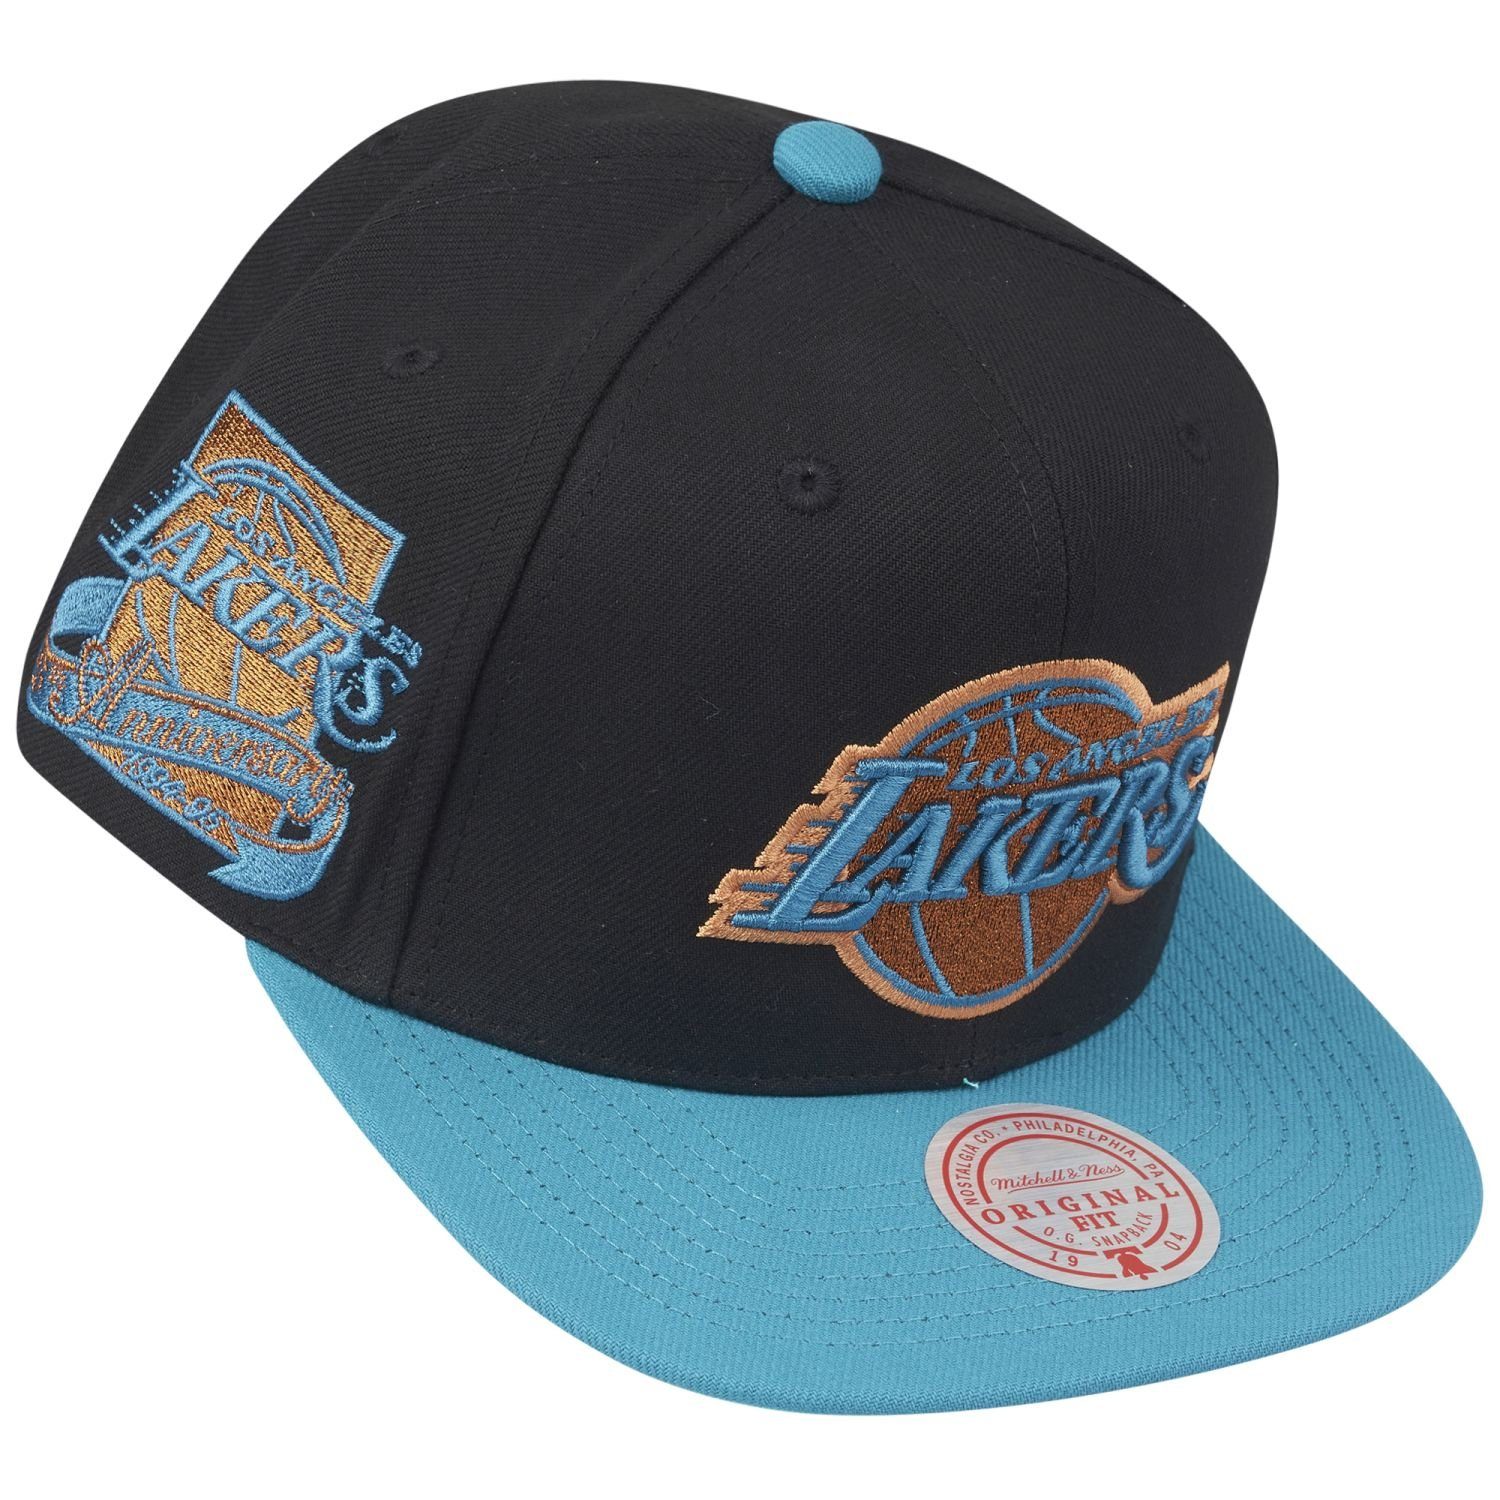 Mitchell Lakers & Los Snapback MAKE CENTS Ness Angeles Cap